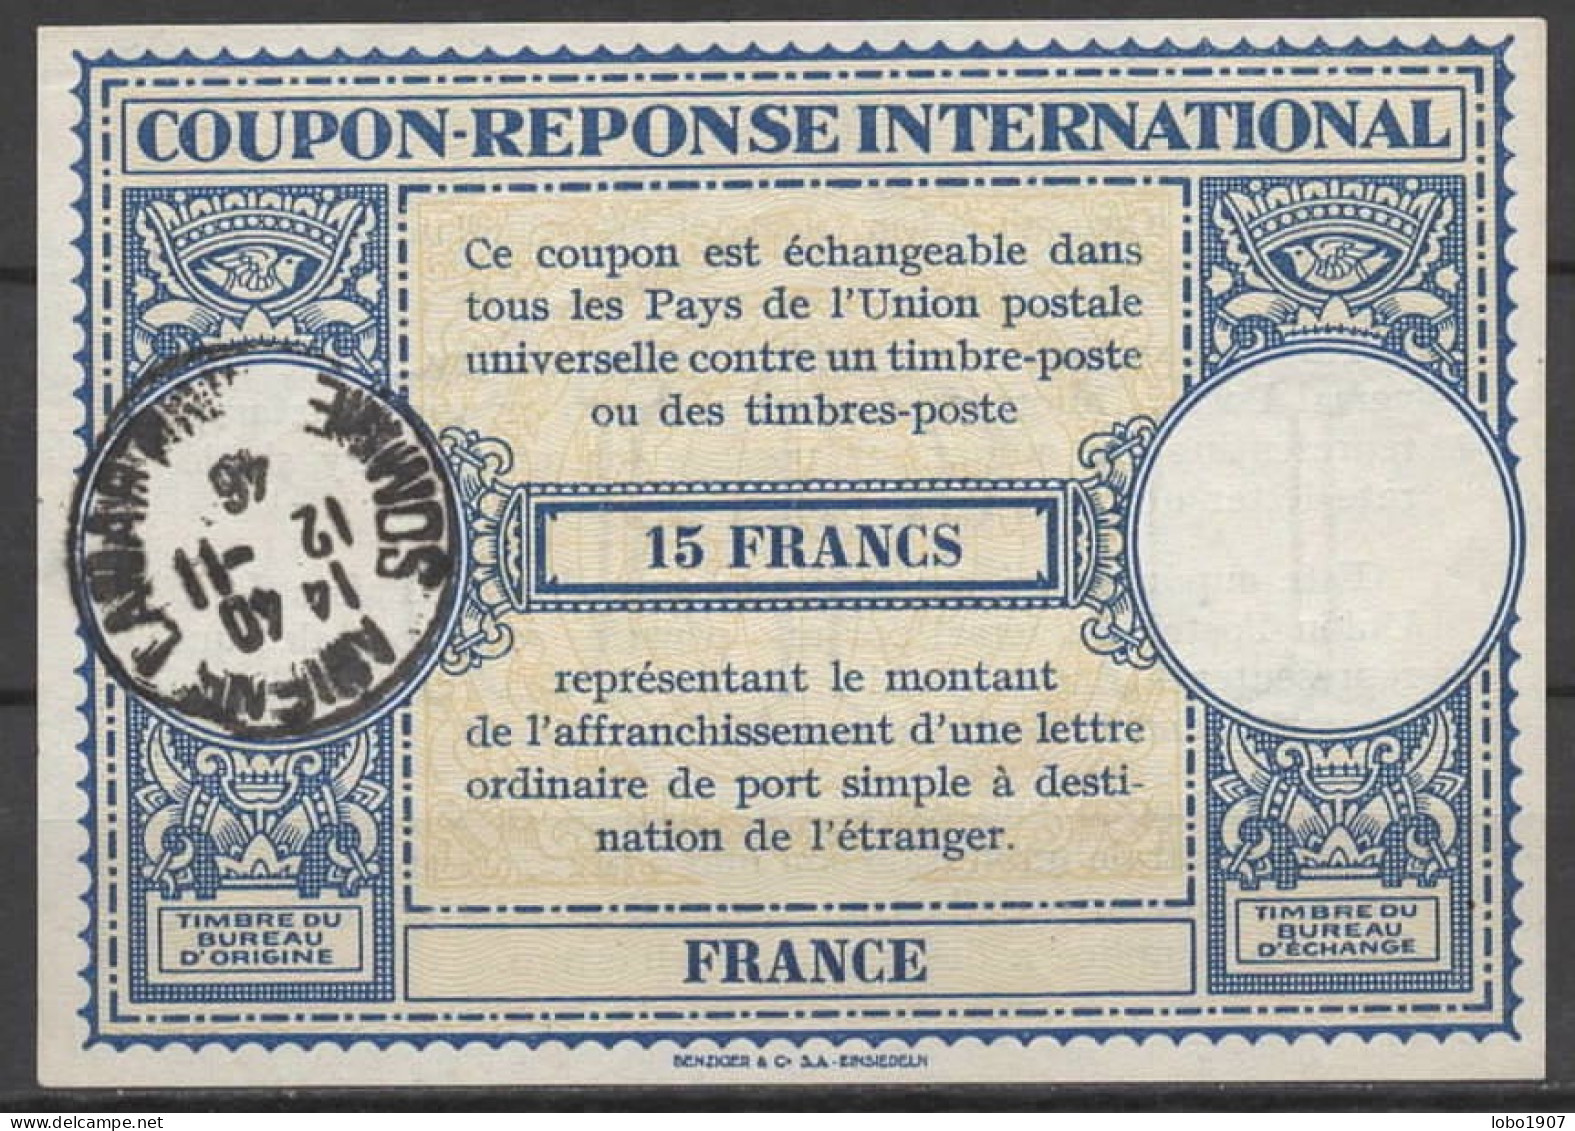 FRANCE  Lo14o  15 FRANCS  International Reply Coupon Reponse Antwortschein IRC IAS Cupon Respuesta O AMIENS LAMARTINE - - Antwoordbons